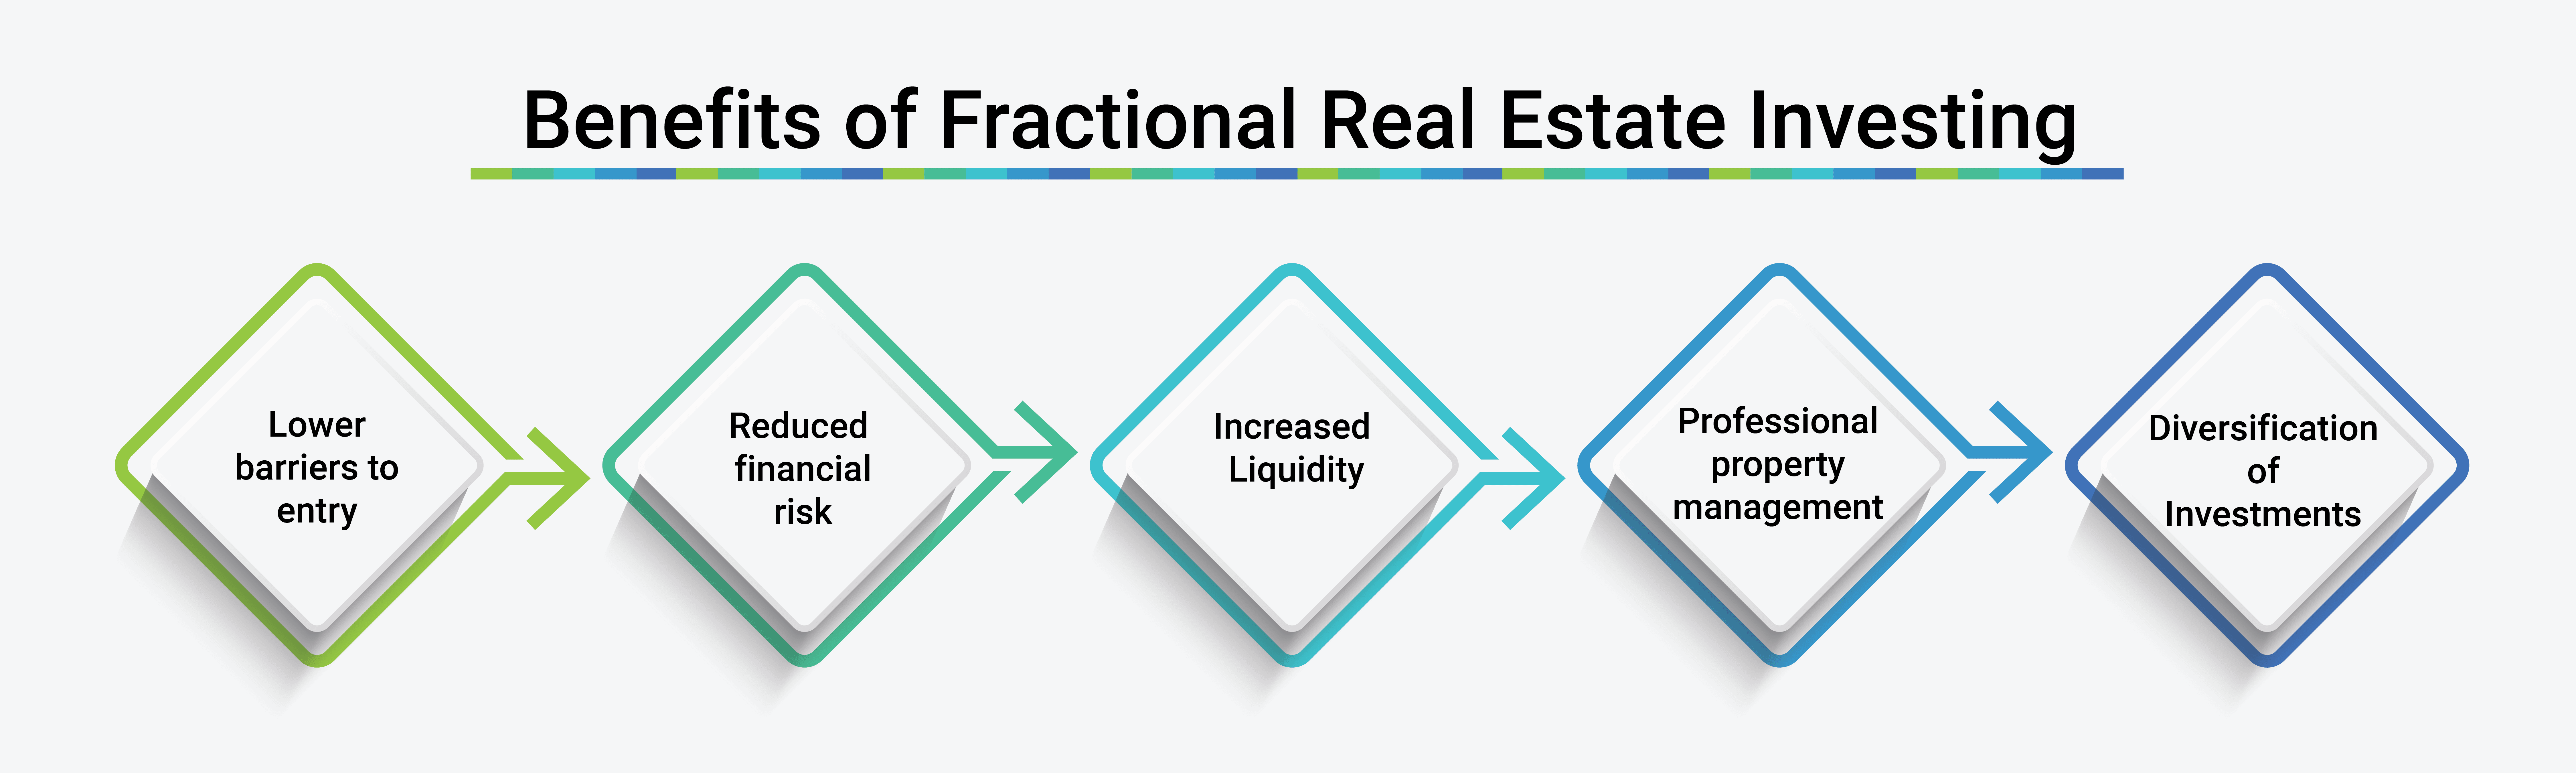 Benefits of Fractional Real Estate Investing (1).png